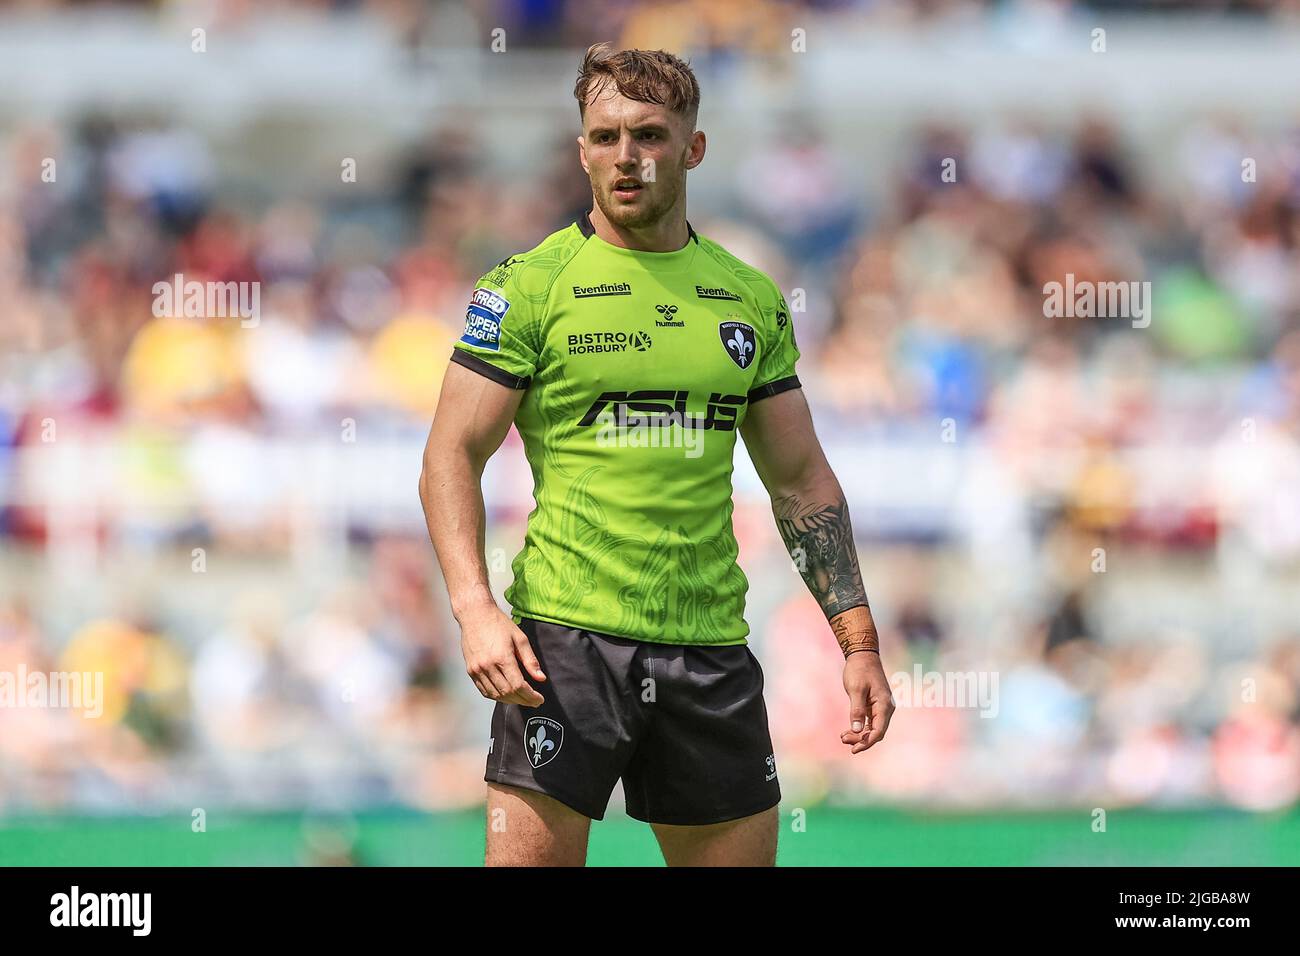 Newcastle, UK. 09th July, 2022. Jack Croft #20 of Wakefield Trinity during the game in Newcastle, United Kingdom on 7/9/2022. (Photo by Mark Cosgrove/News Images/Sipa USA) Credit: Sipa USA/Alamy Live News Stock Photo